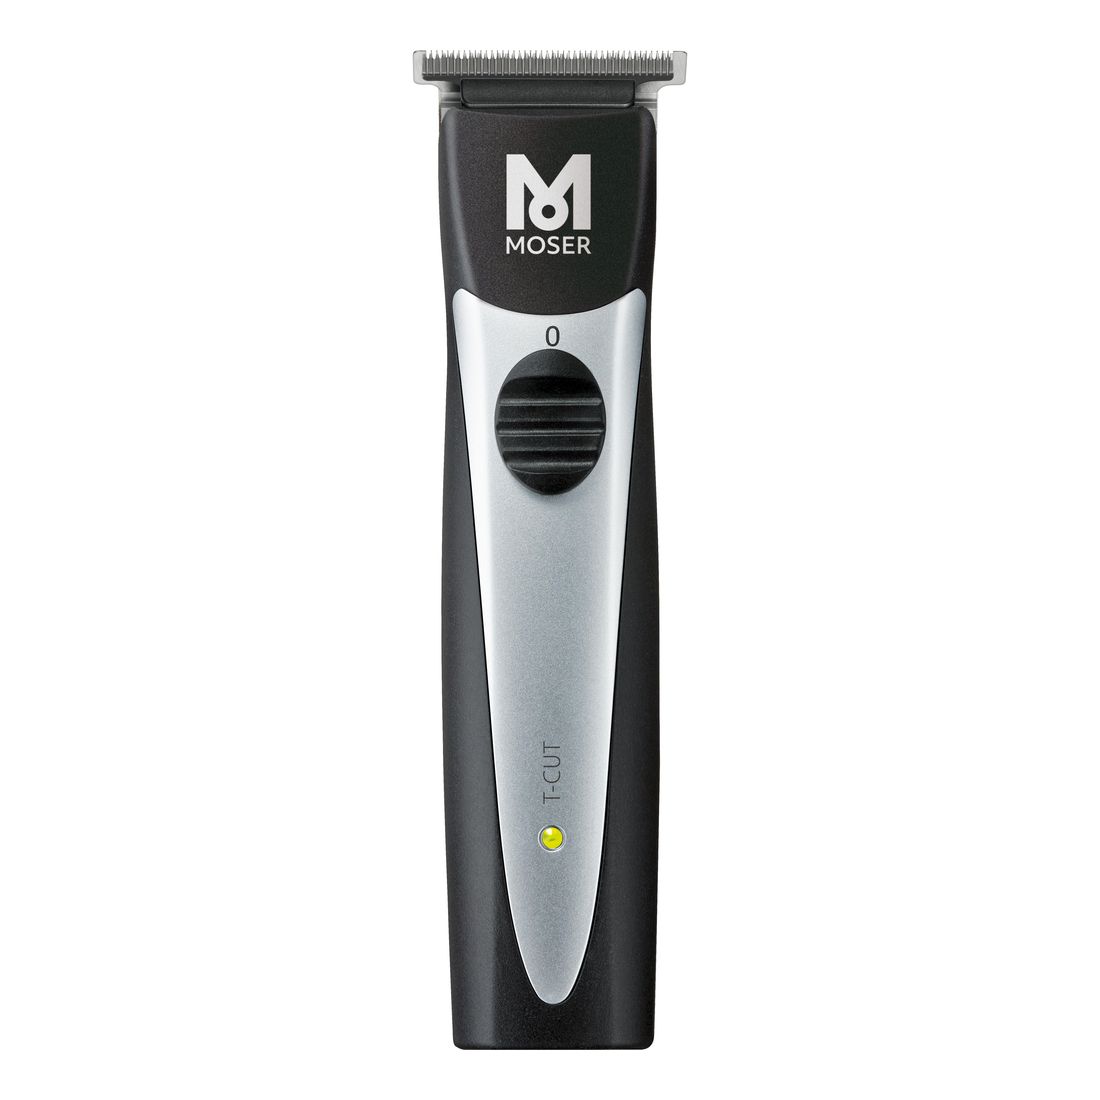 Moser T-Cut Professional Cordless Trimmer with T-Blade - Black/Silver